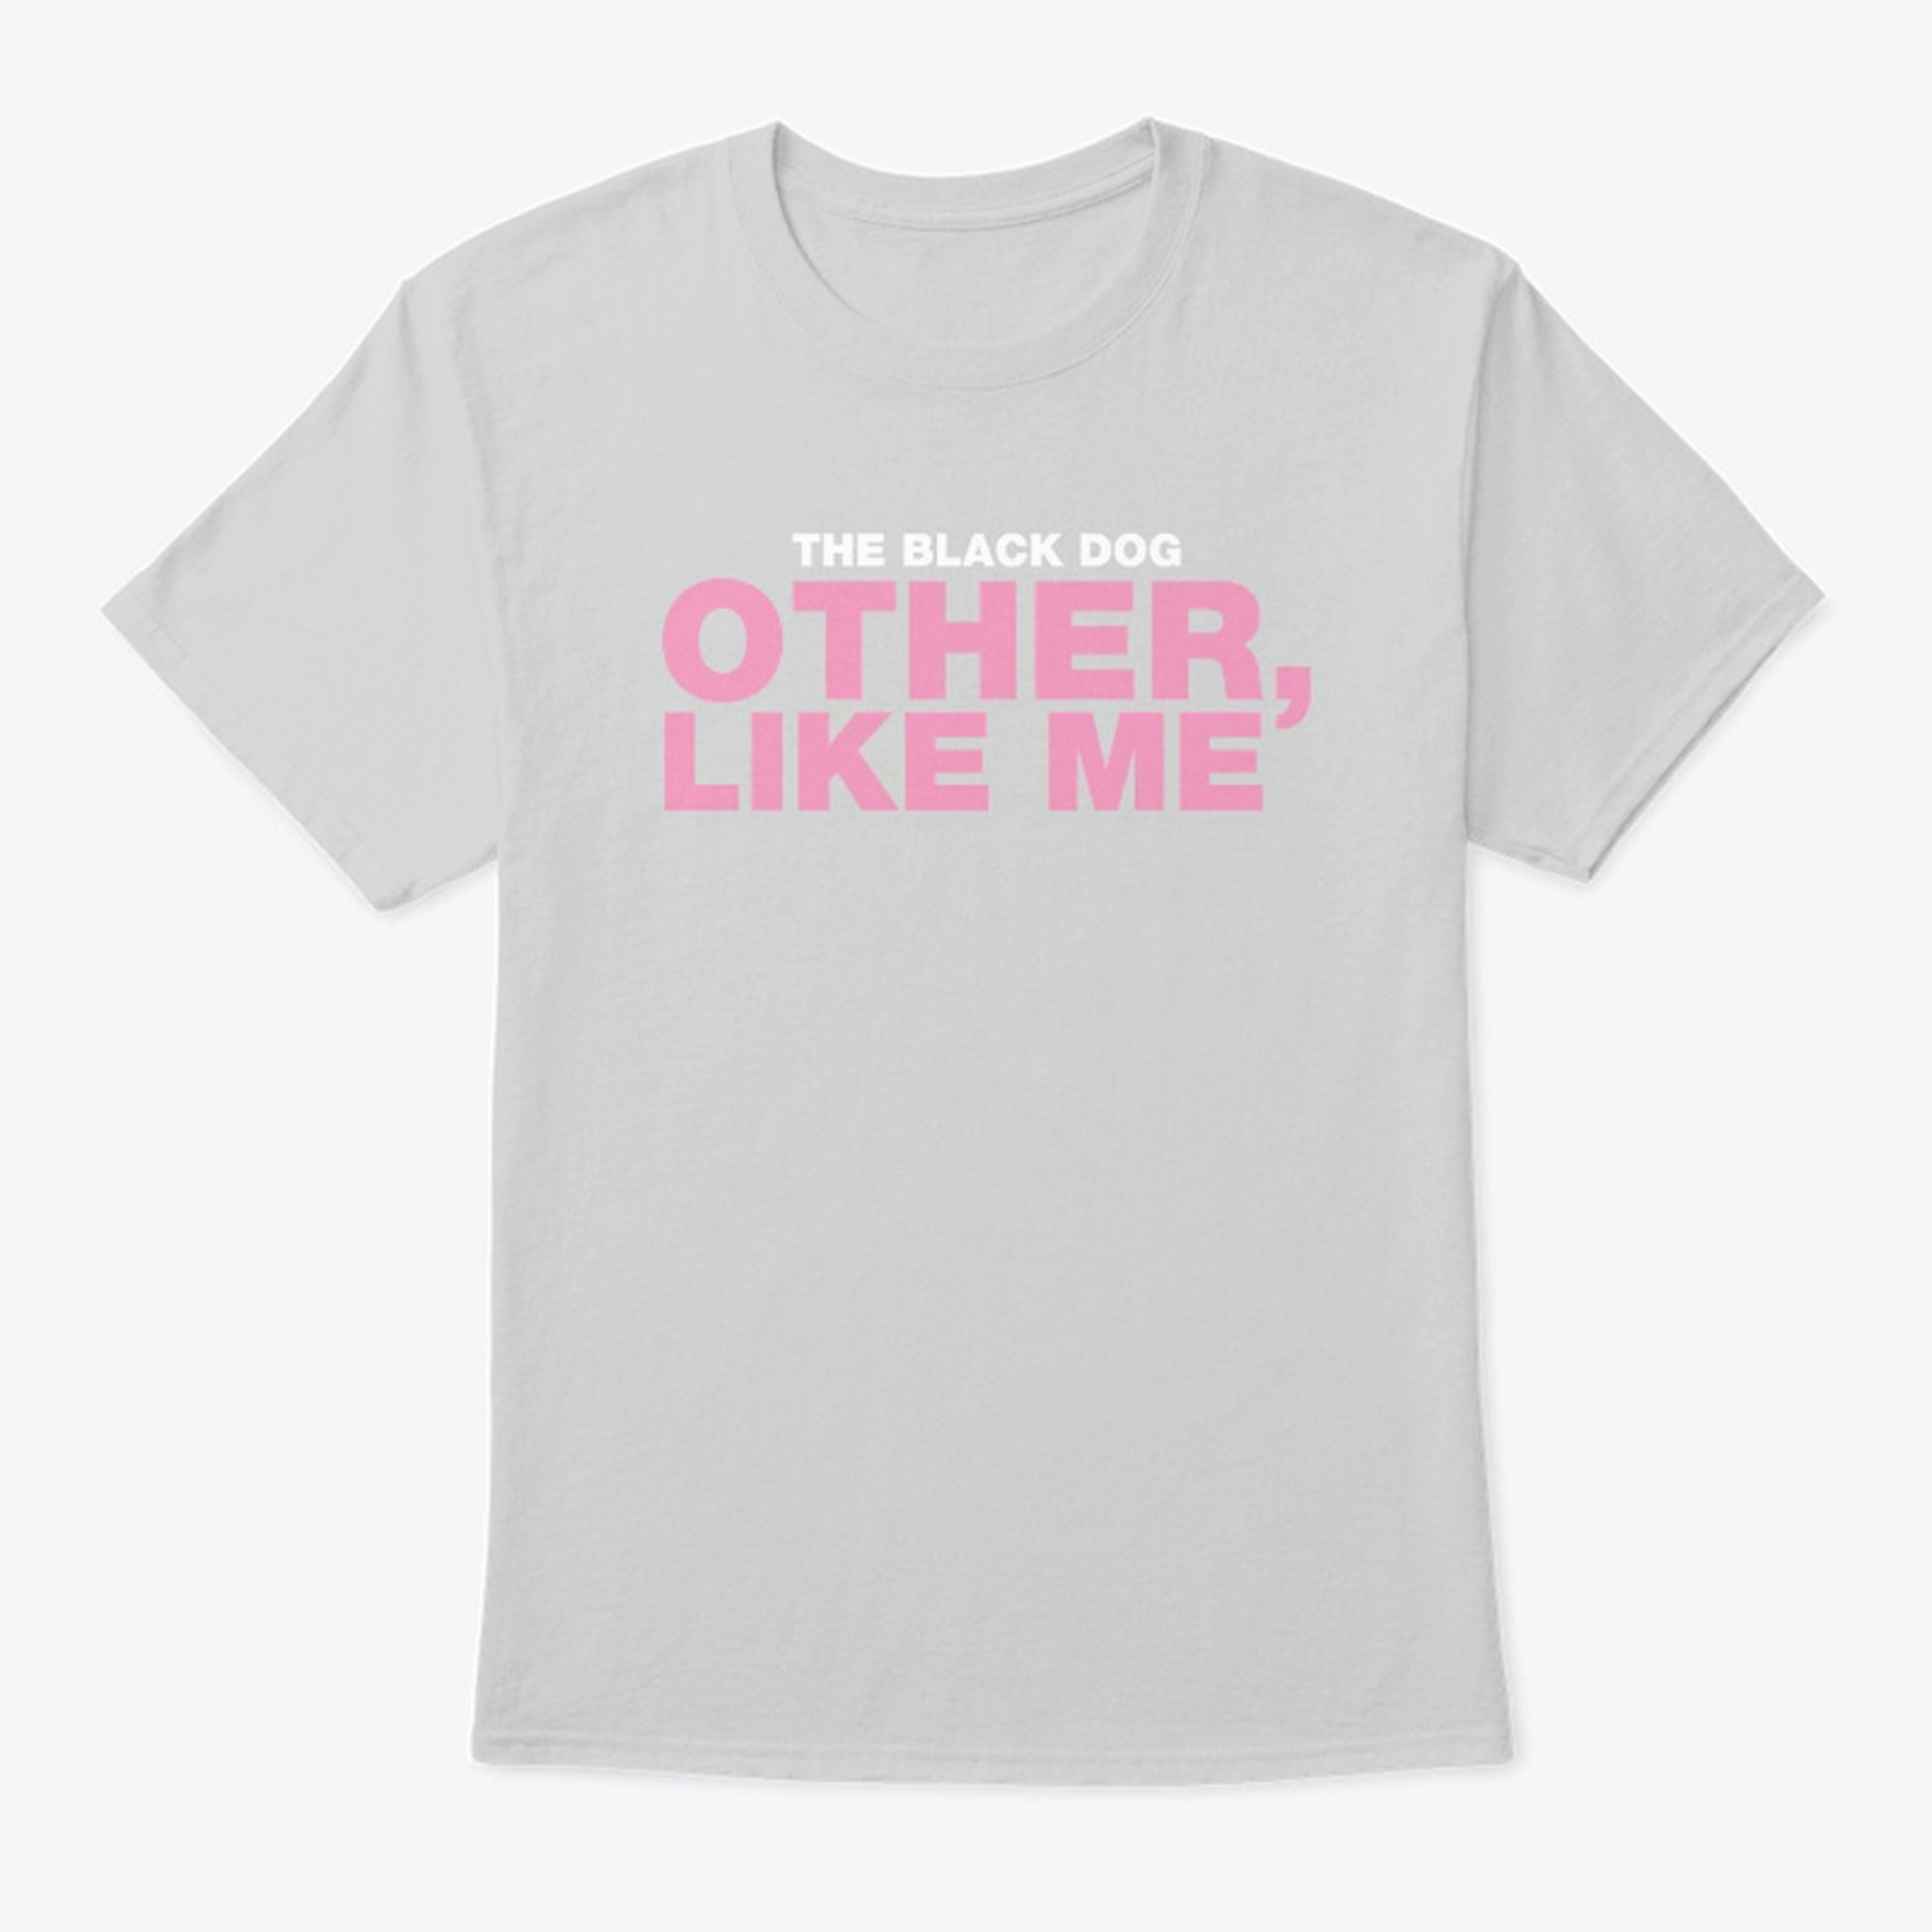 Other, Like Me Design 2